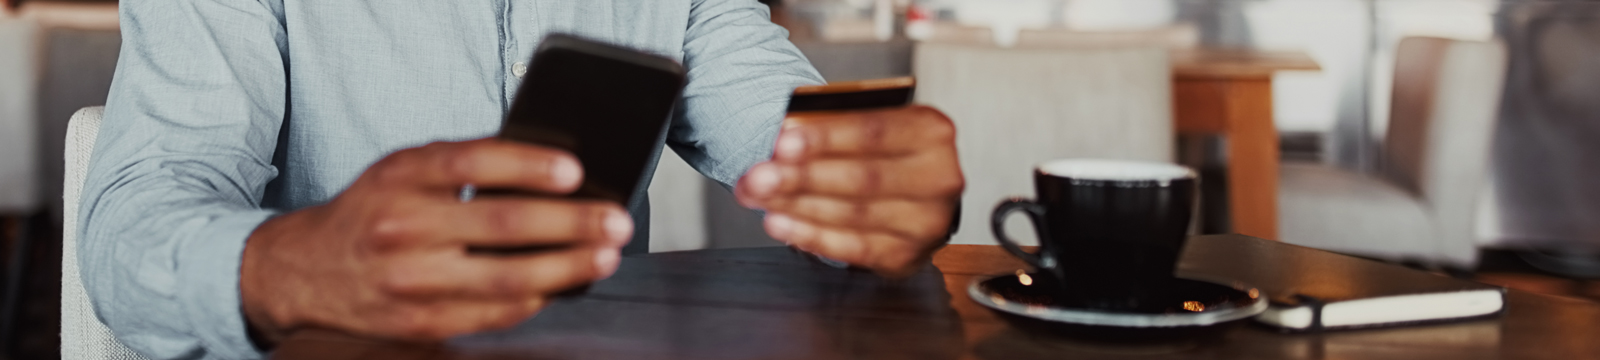 Man using credit card with smartphone